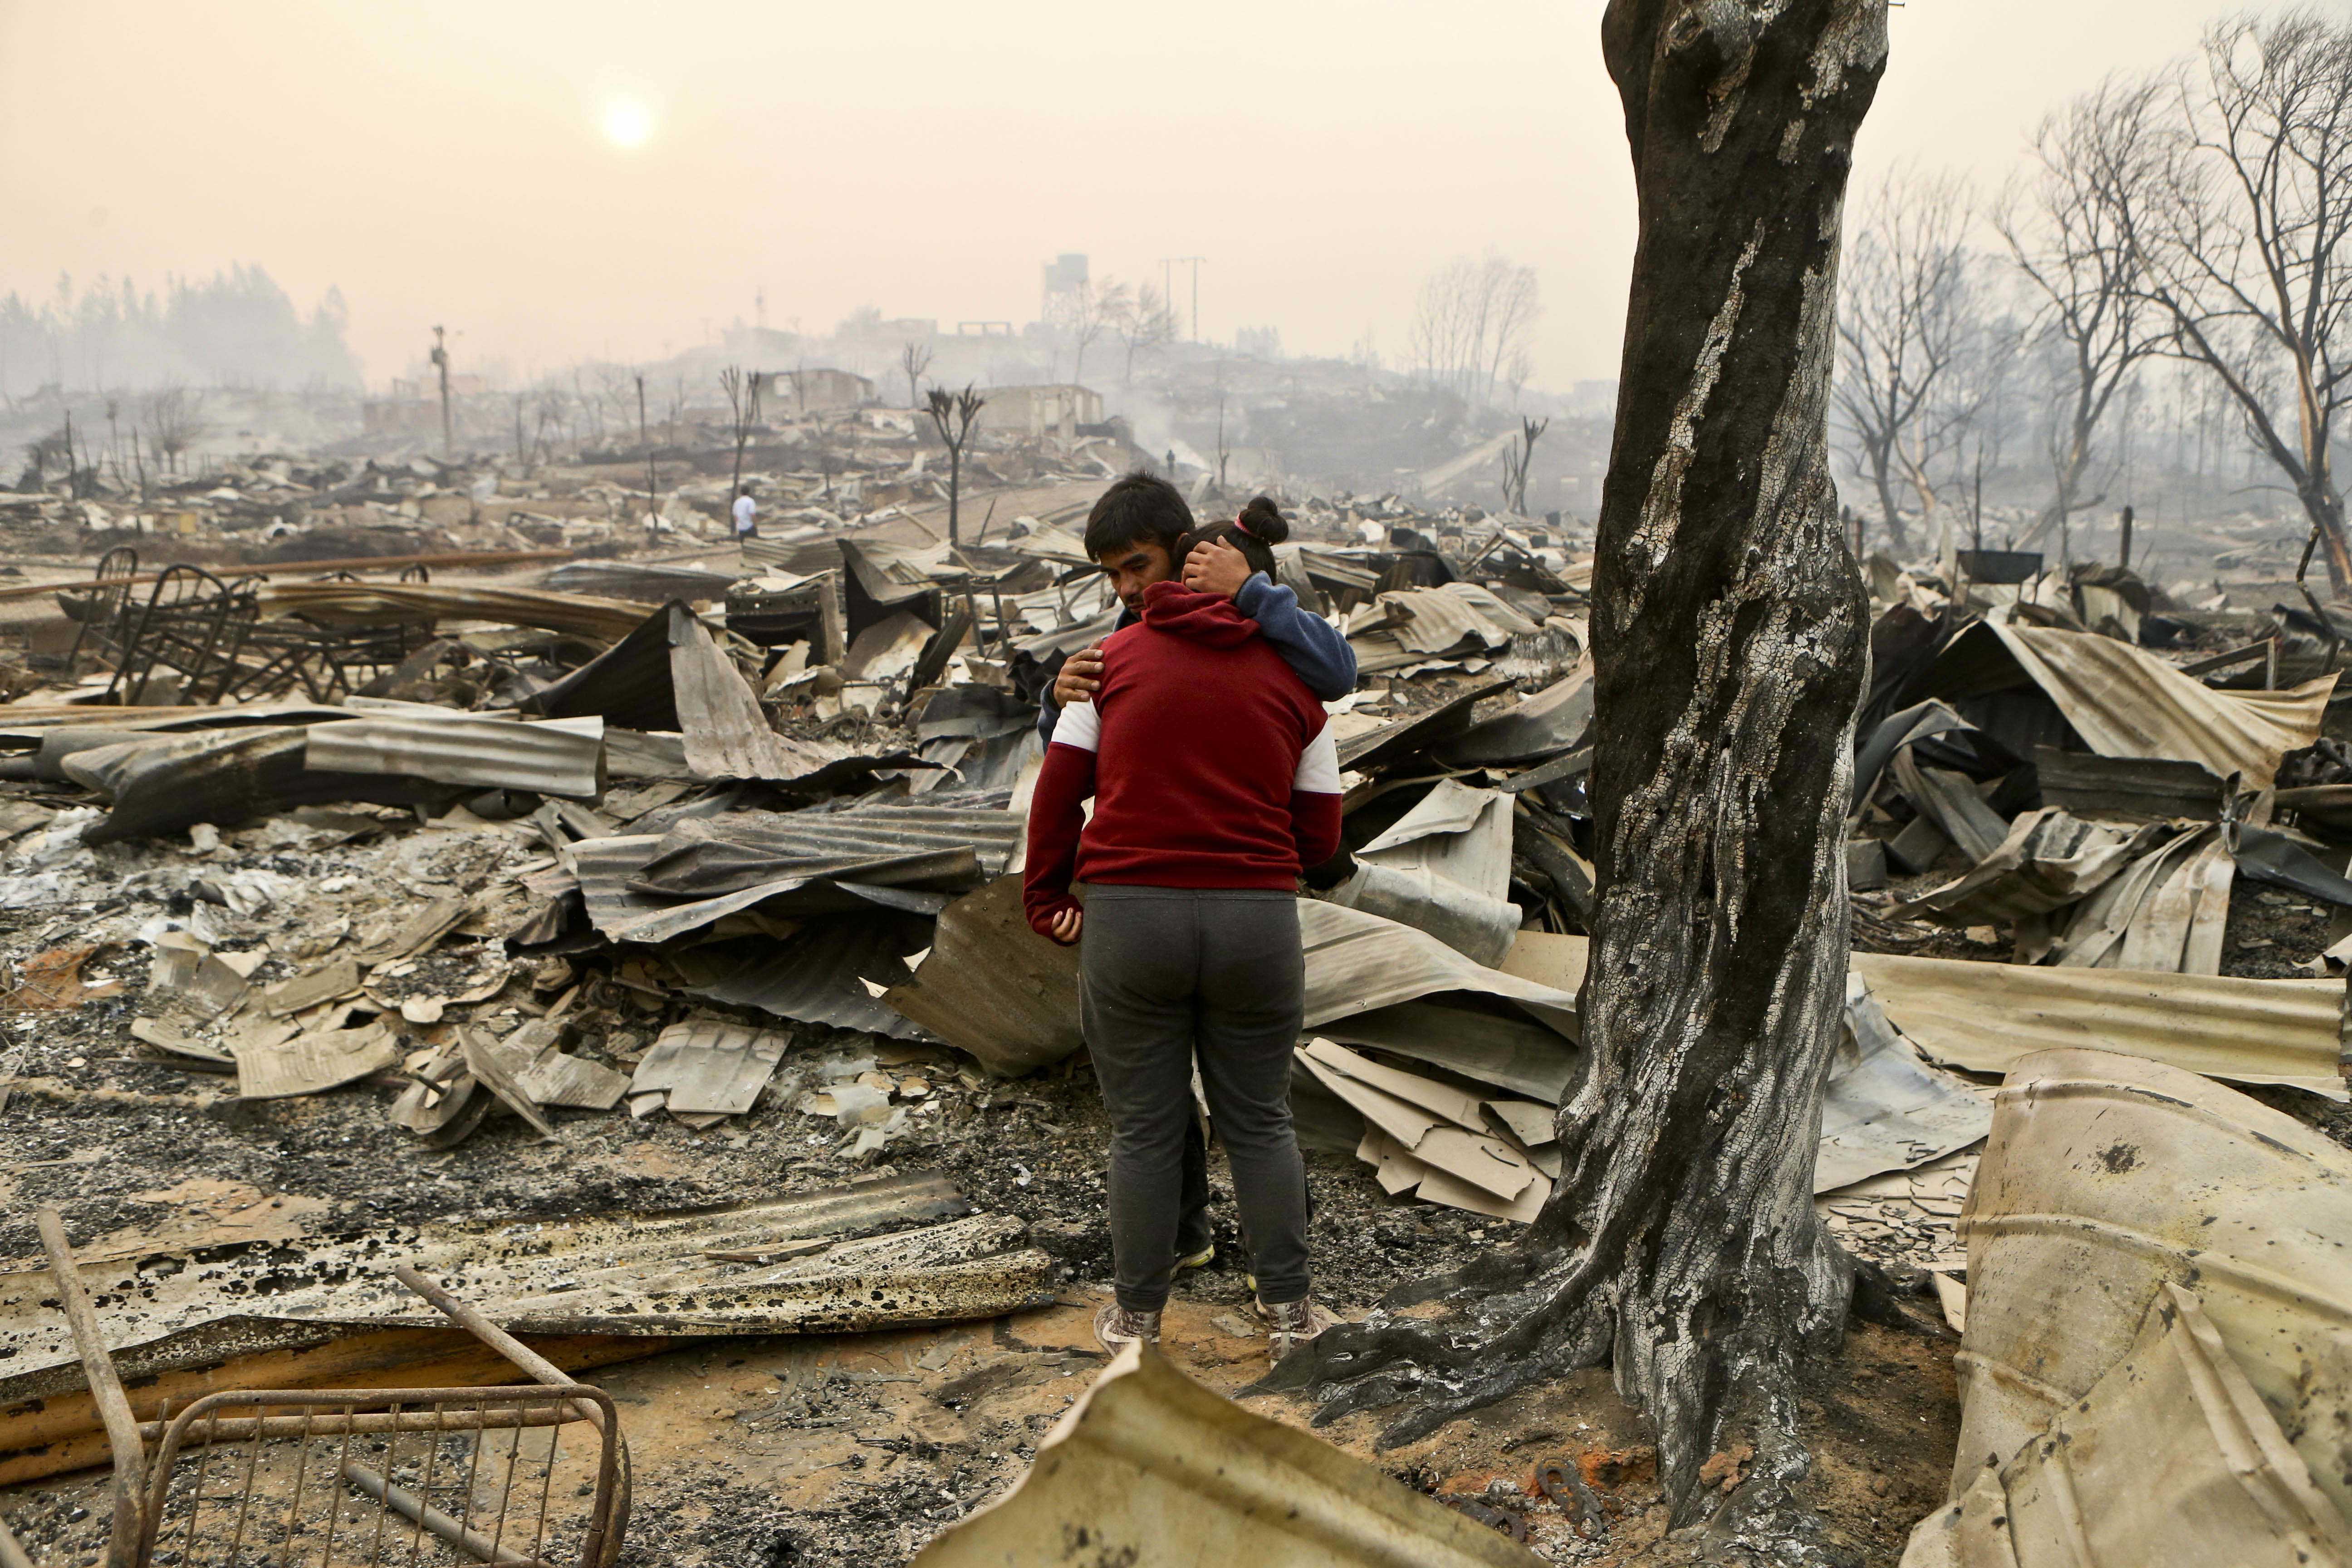 Juan Vega embraces his daughter where their home once stood after a wildfire in Santa Olga, Chile, Thursday, Jan. 26, 2017. Officials say the town was consumed by the country's worst wildfires, engulfing the post office, a kindergarten and hundreds of homes. (AP Photo/Esteban Felix)